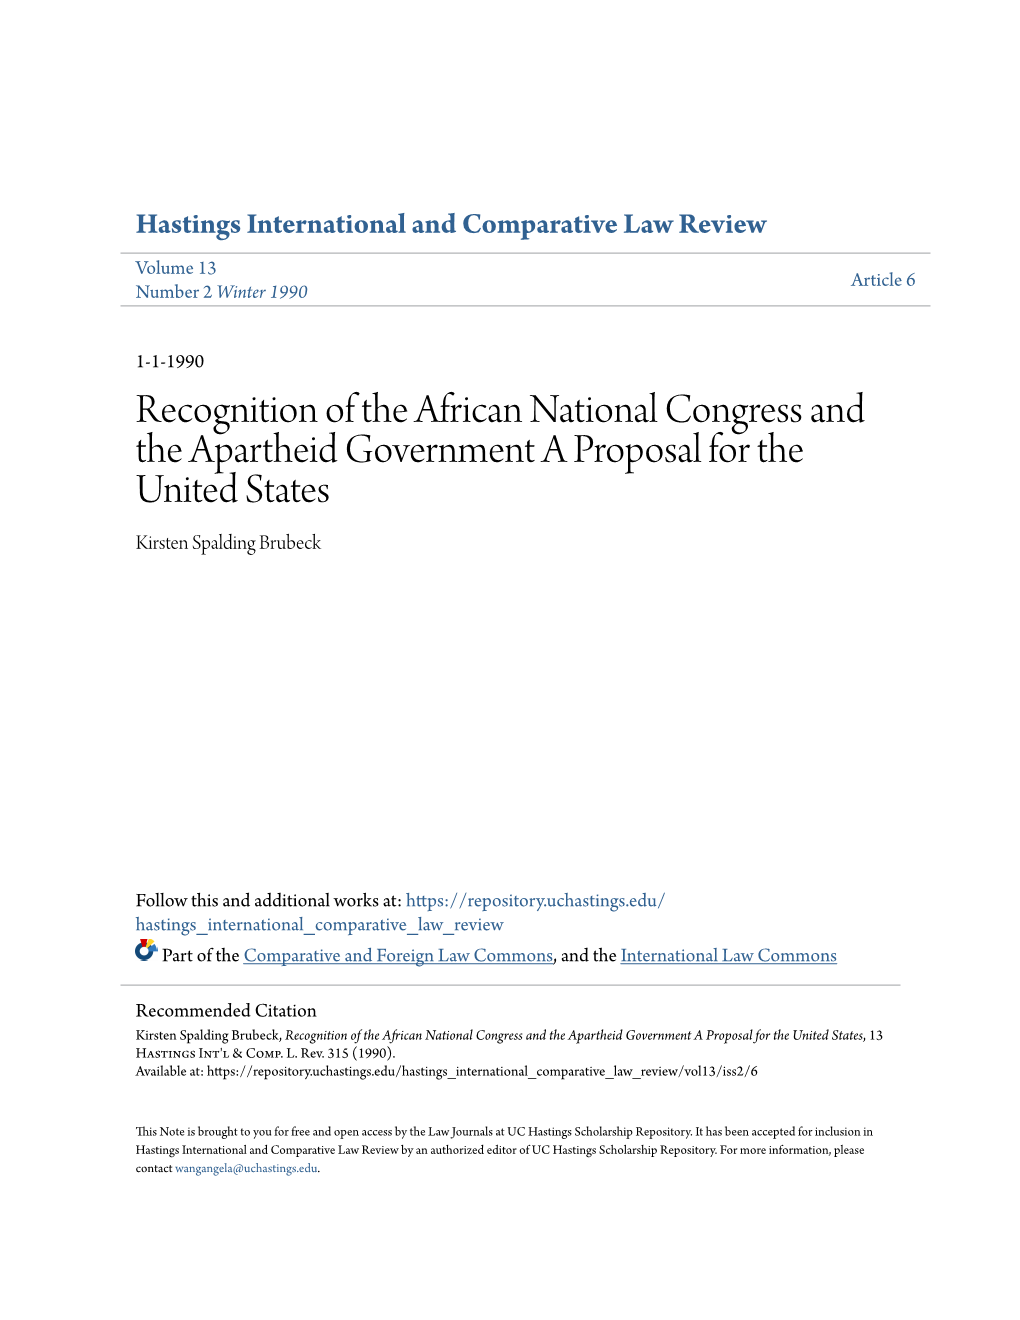 Recognition of the African National Congress and the Apartheid Government a Proposal for the United States Kirsten Spalding Brubeck